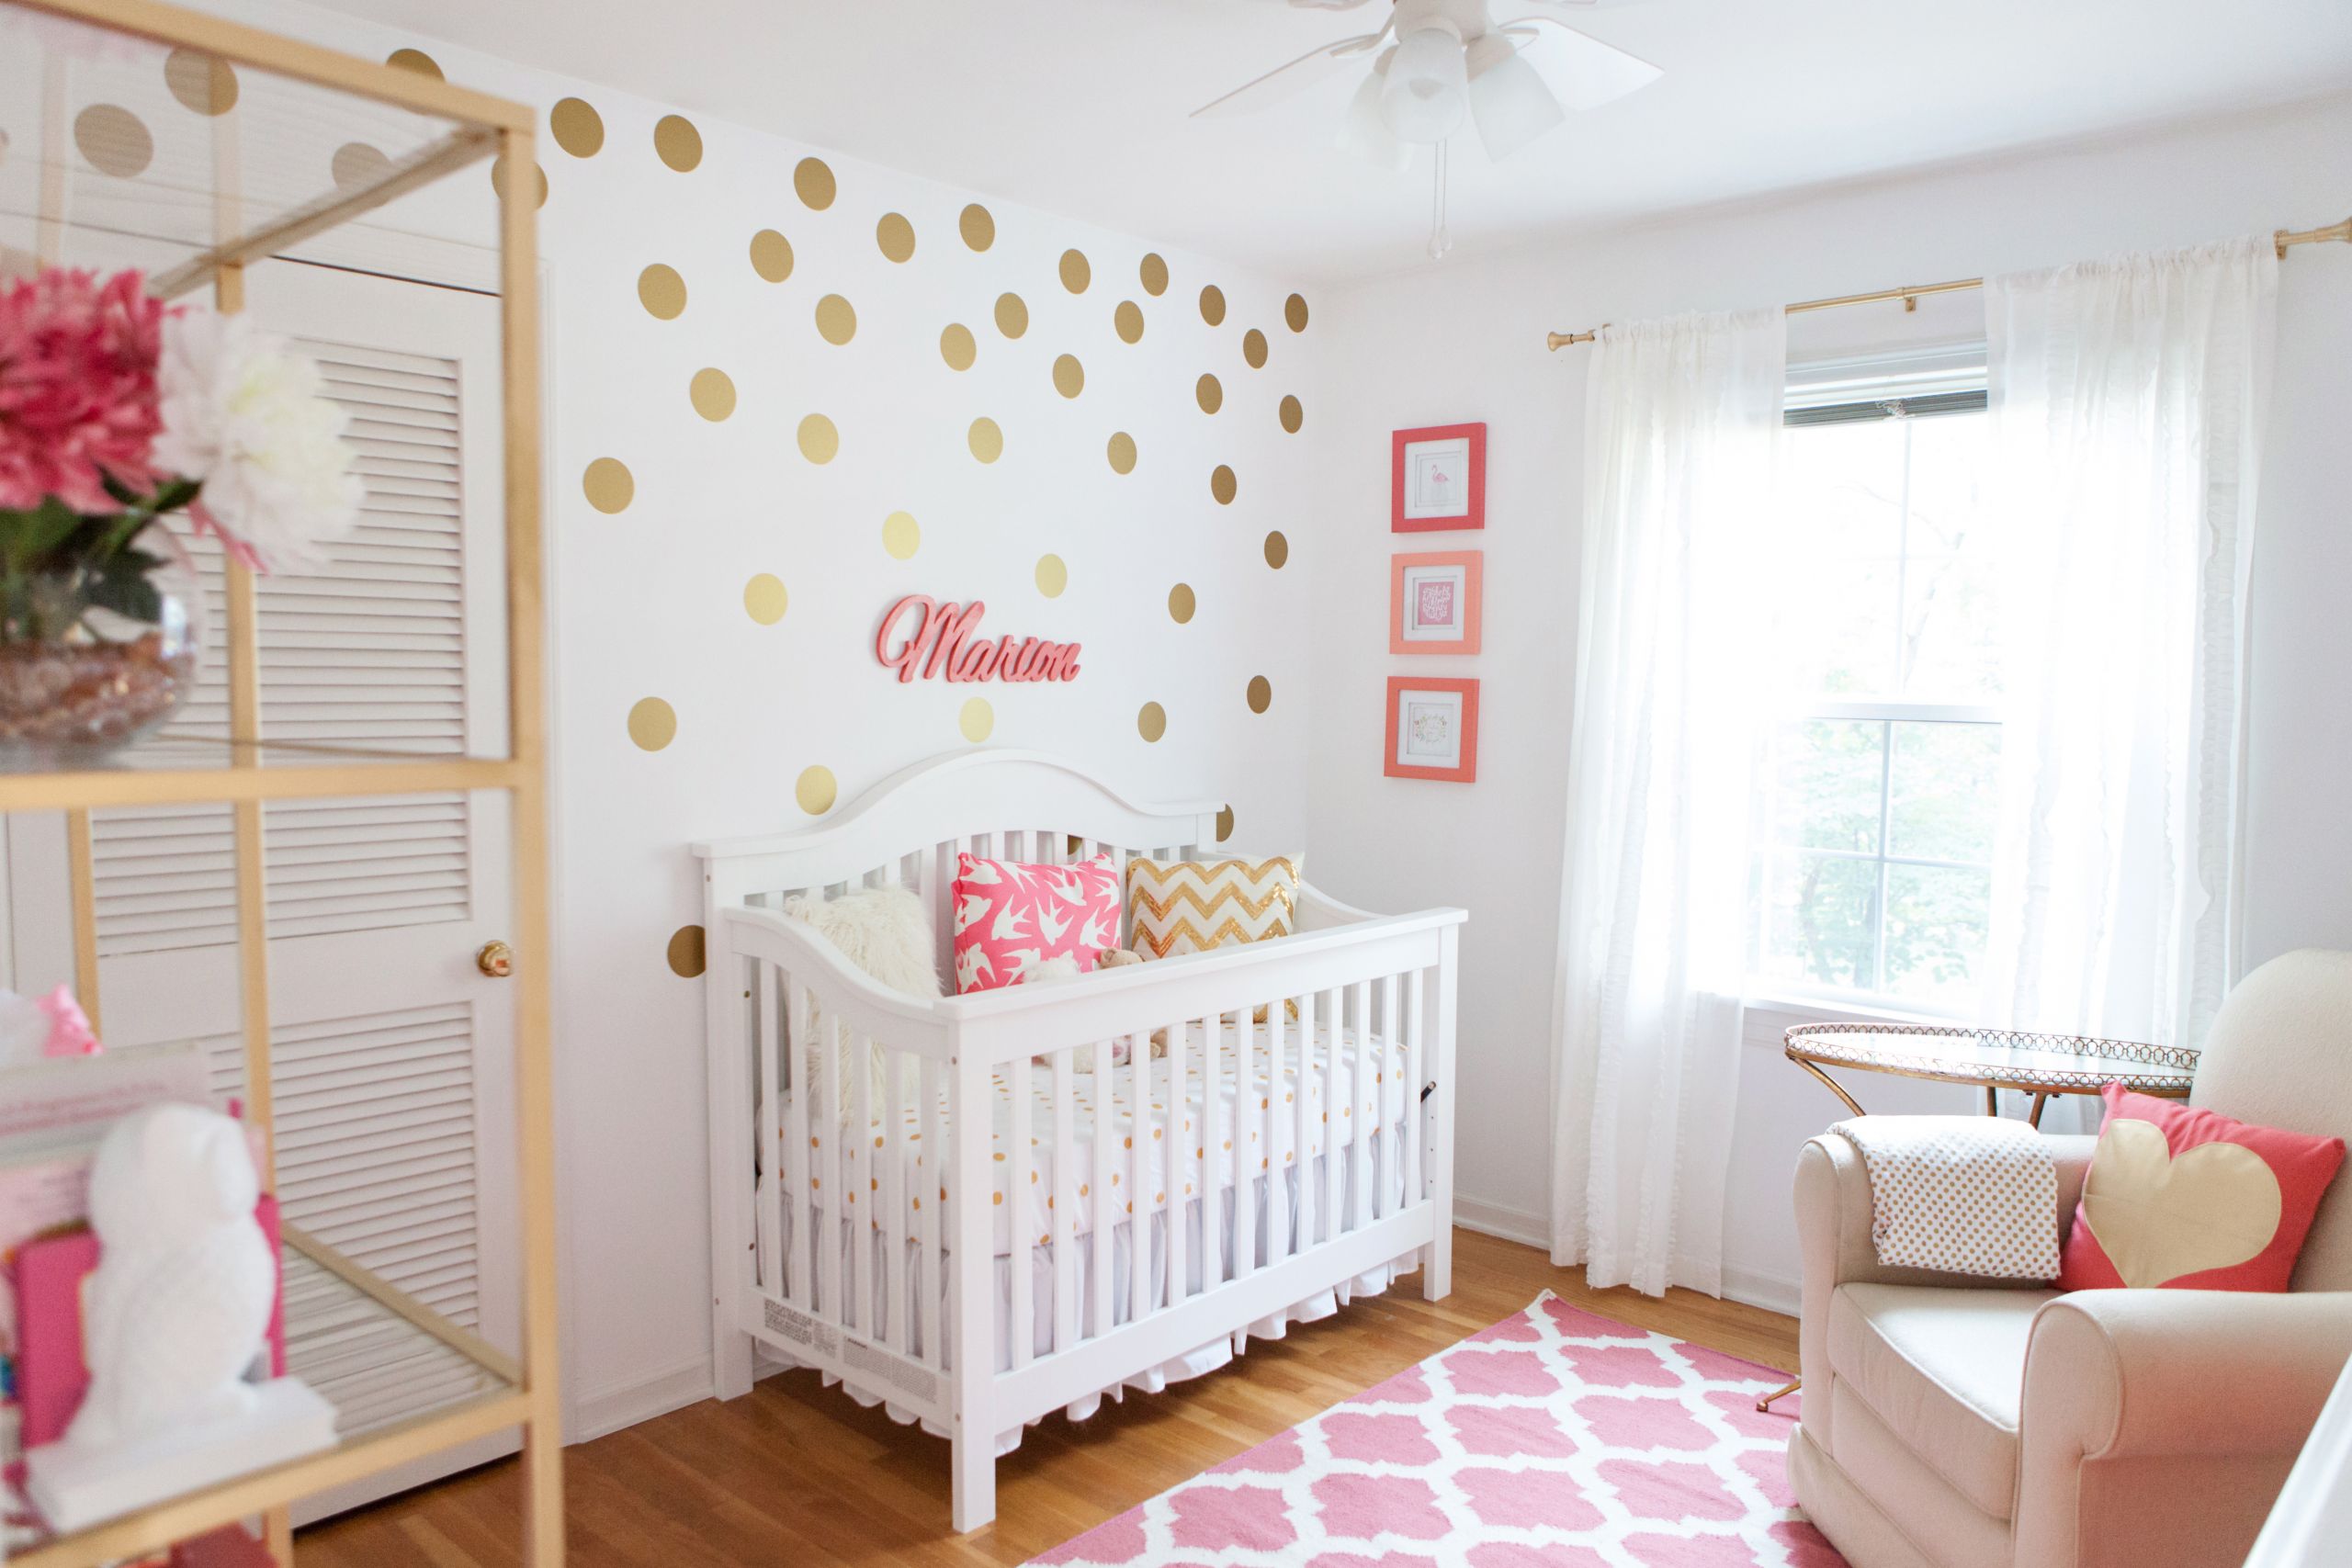 Room Decoration For Baby
 Marion s Coral and Gold Polka Dot Nursery Project Nursery